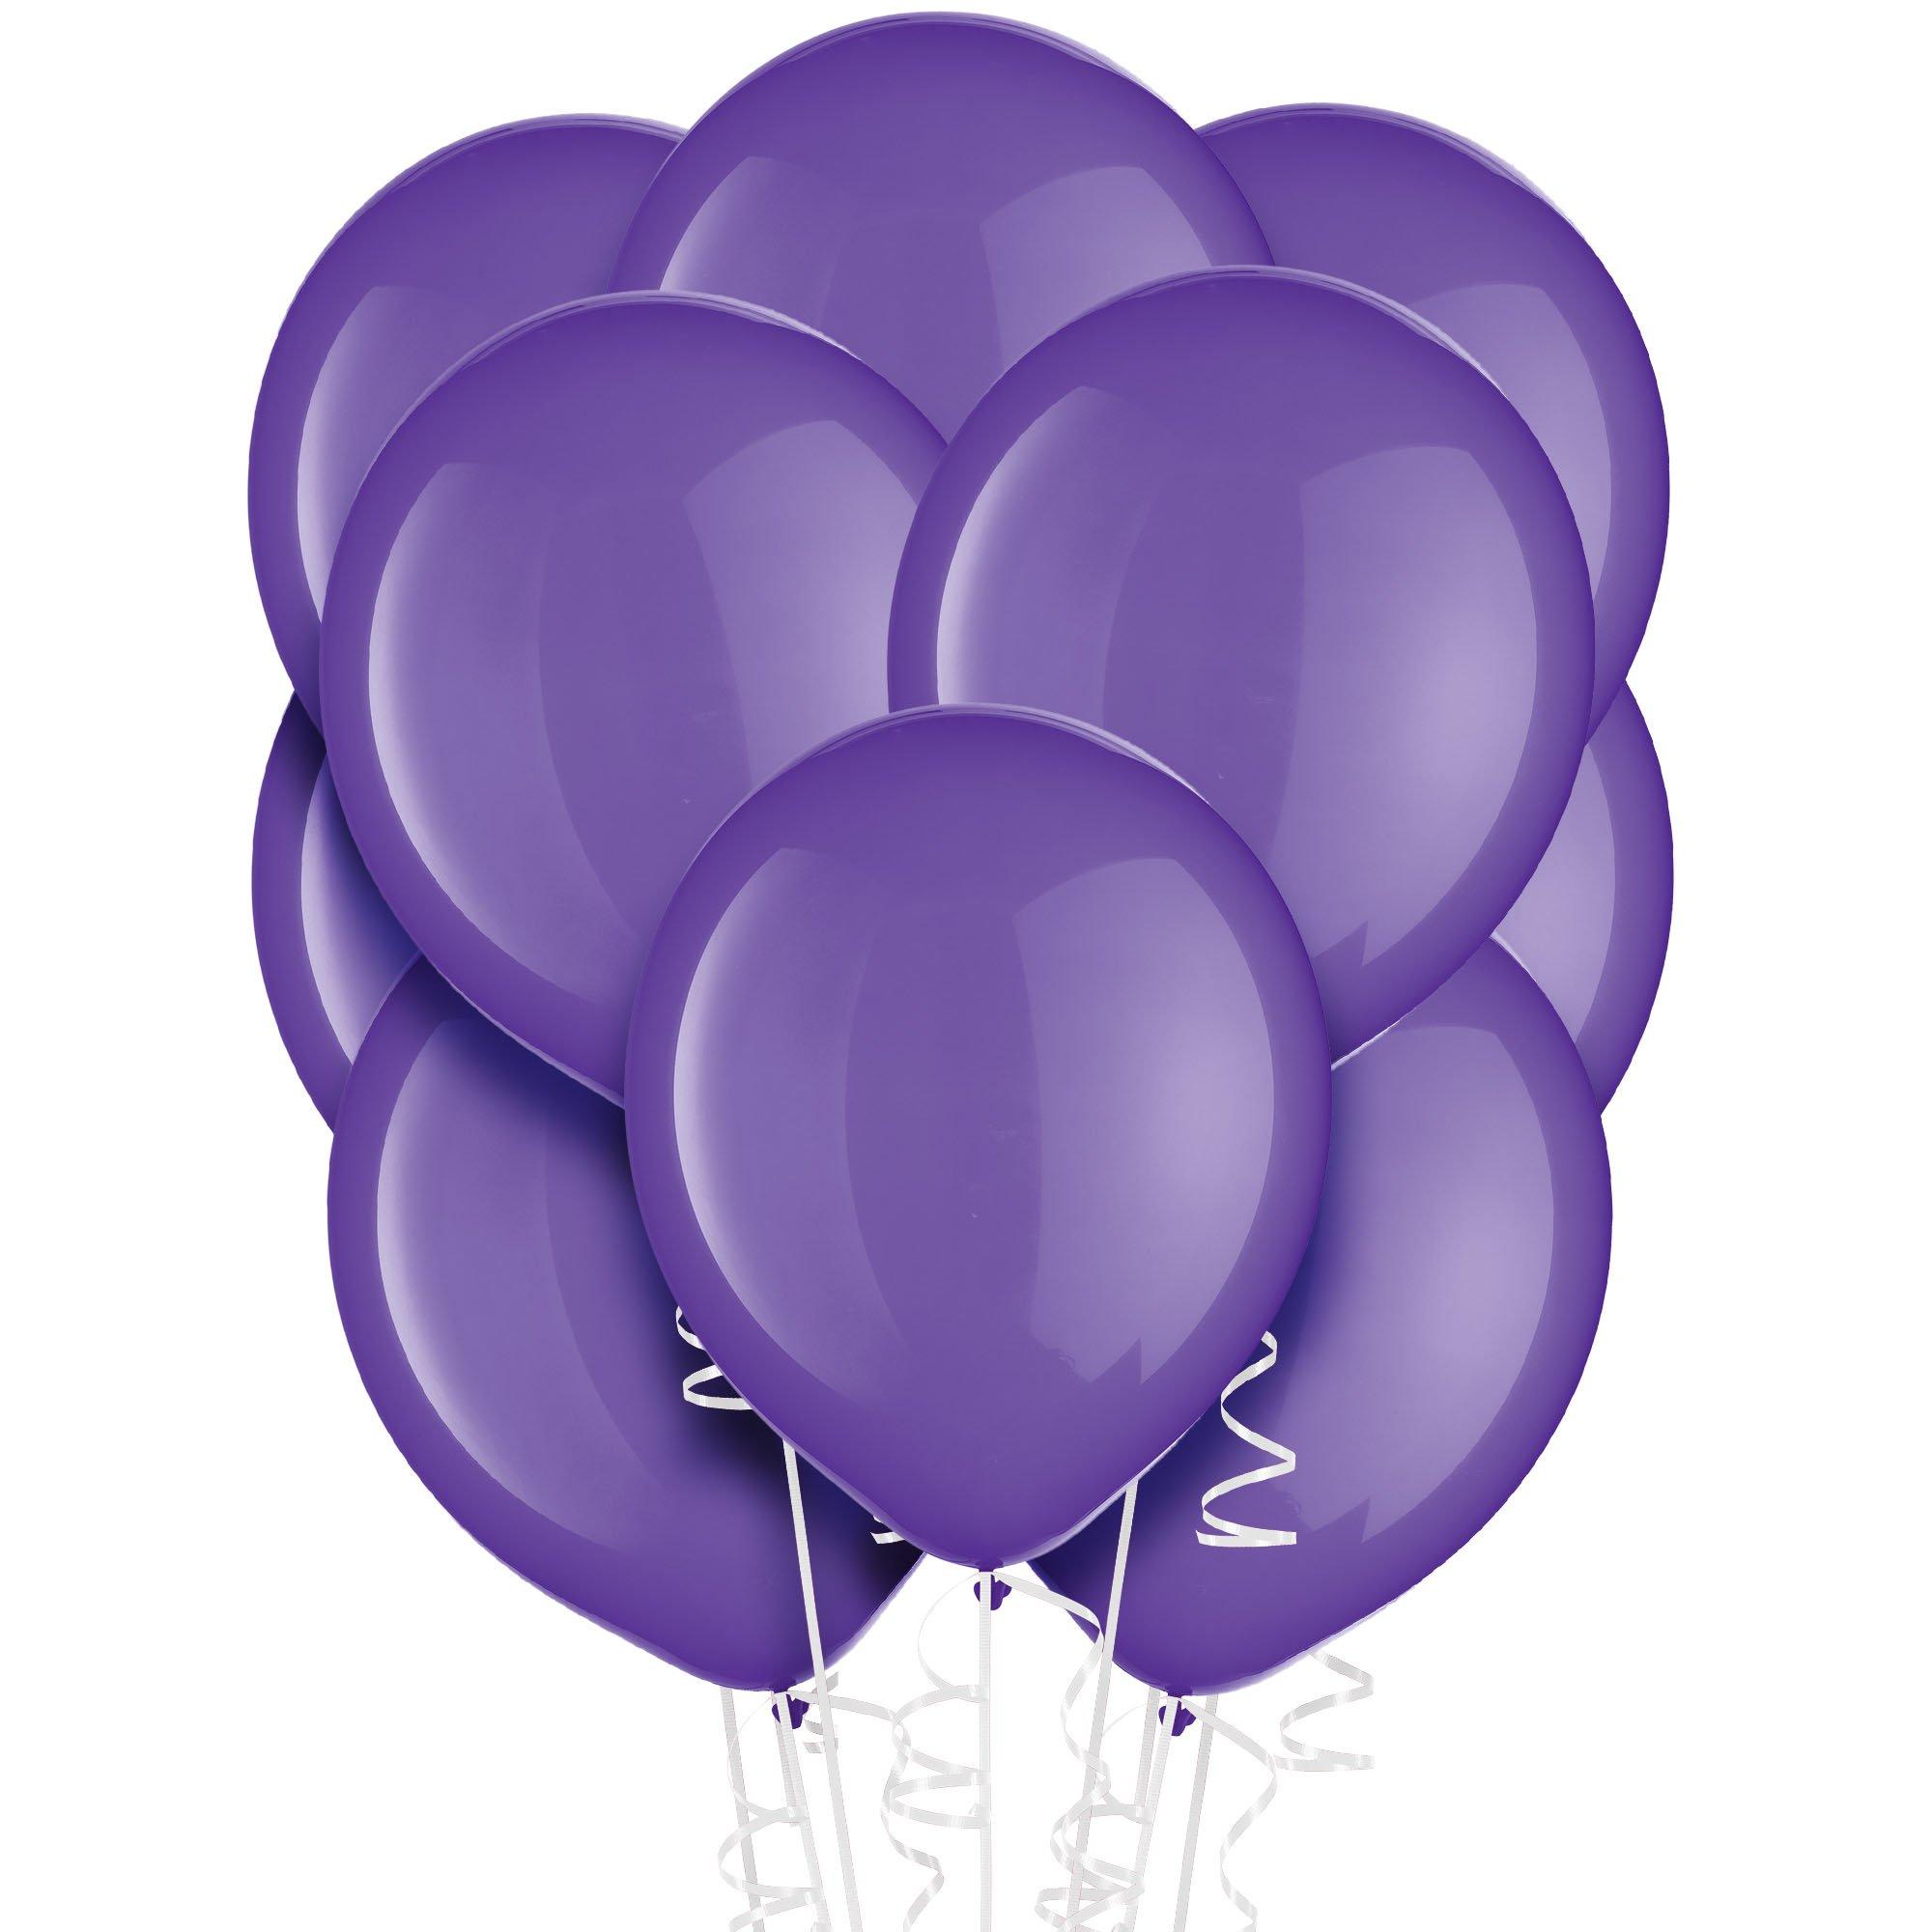 72ct, 12in, Purple Balloons | Party City